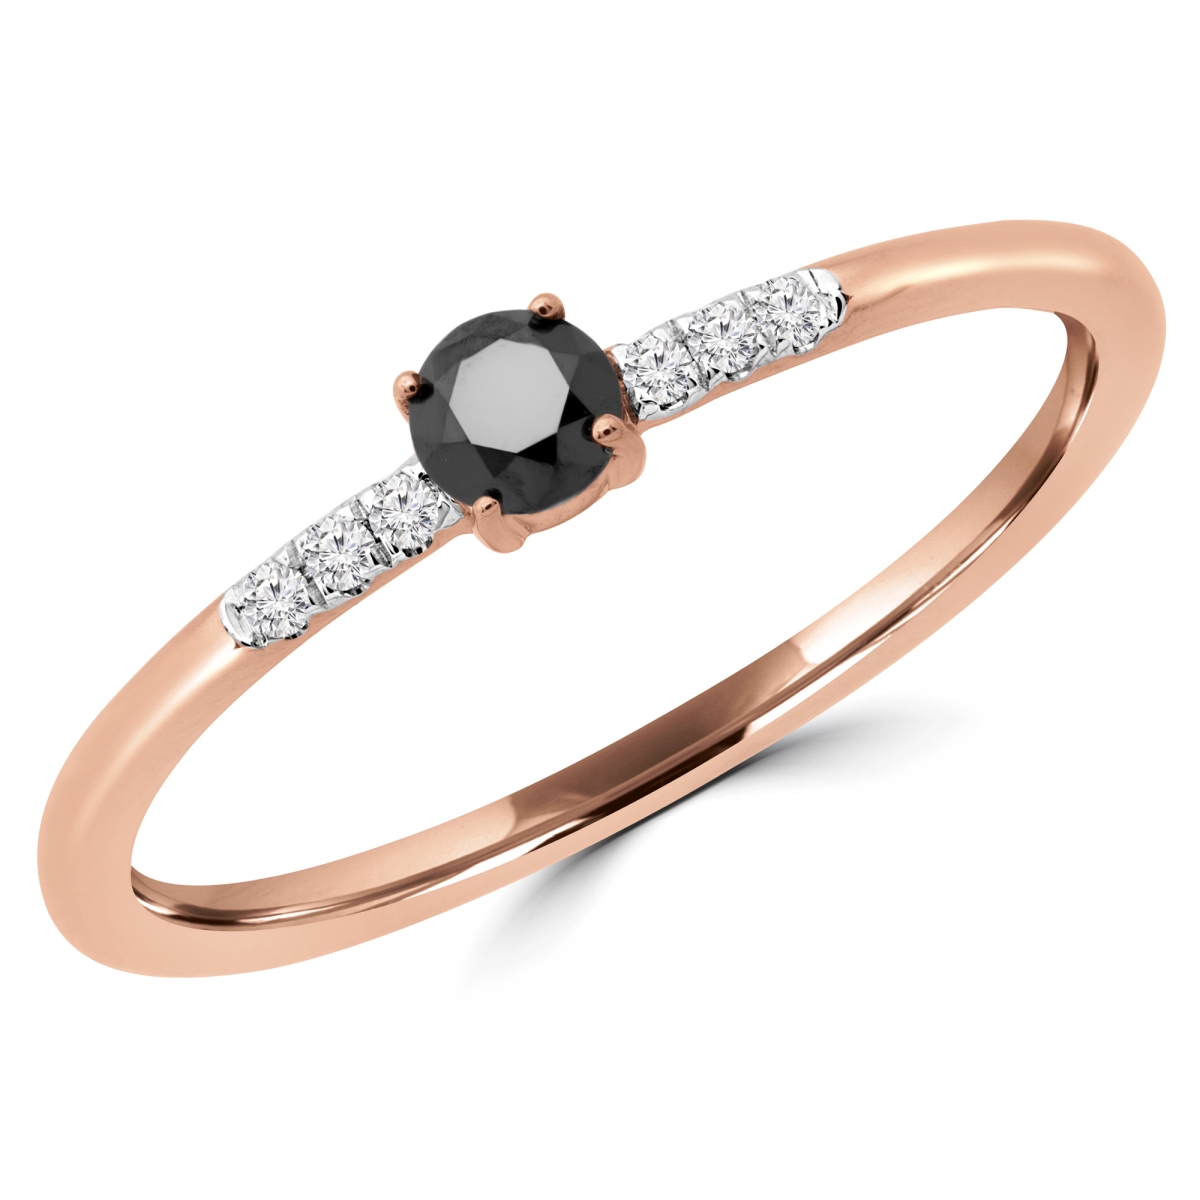 Picture of Majesty Diamonds MDR190079-8.25 0.16 CTW Round Black Diamond Bezel Set Cocktail Ring in 14K Rose Gold - Size 8.25